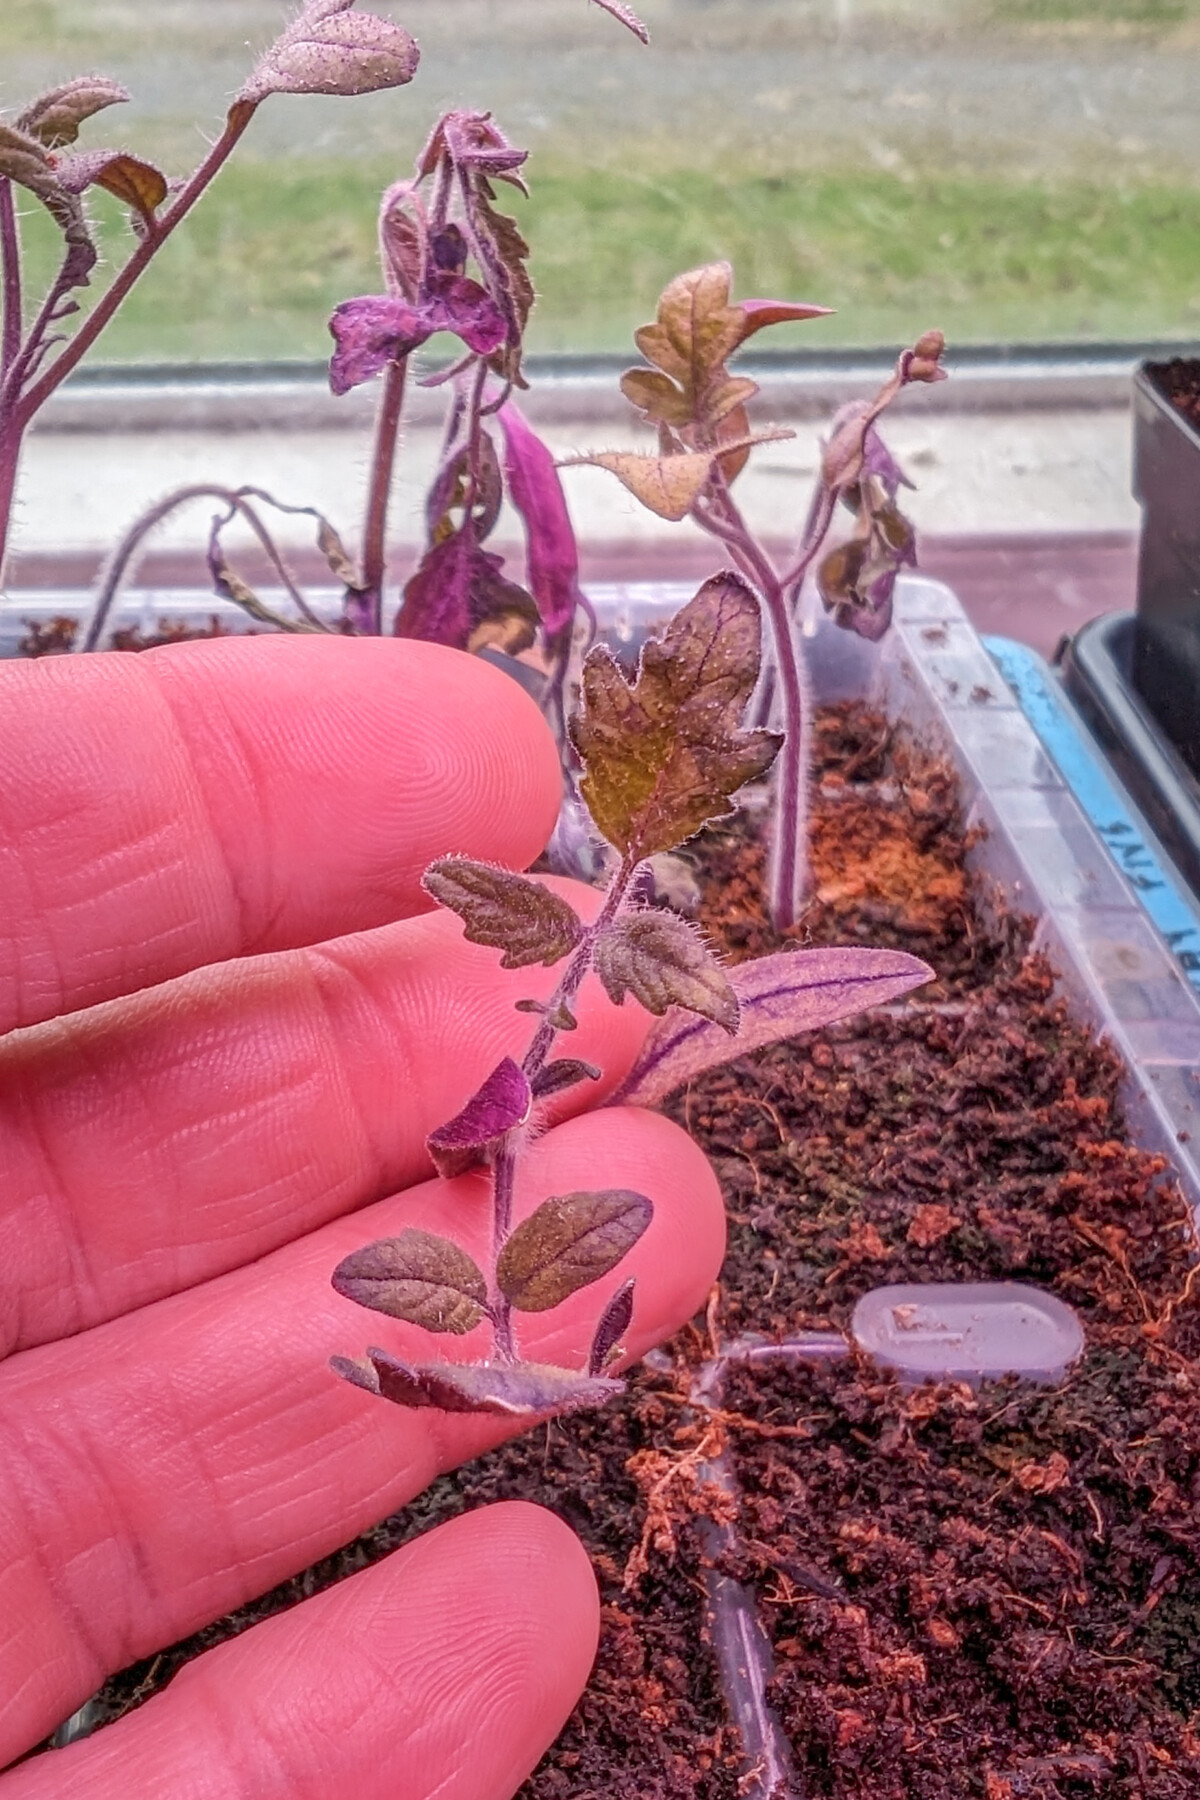 Fingers holding a small tomato seedling that has turned purple